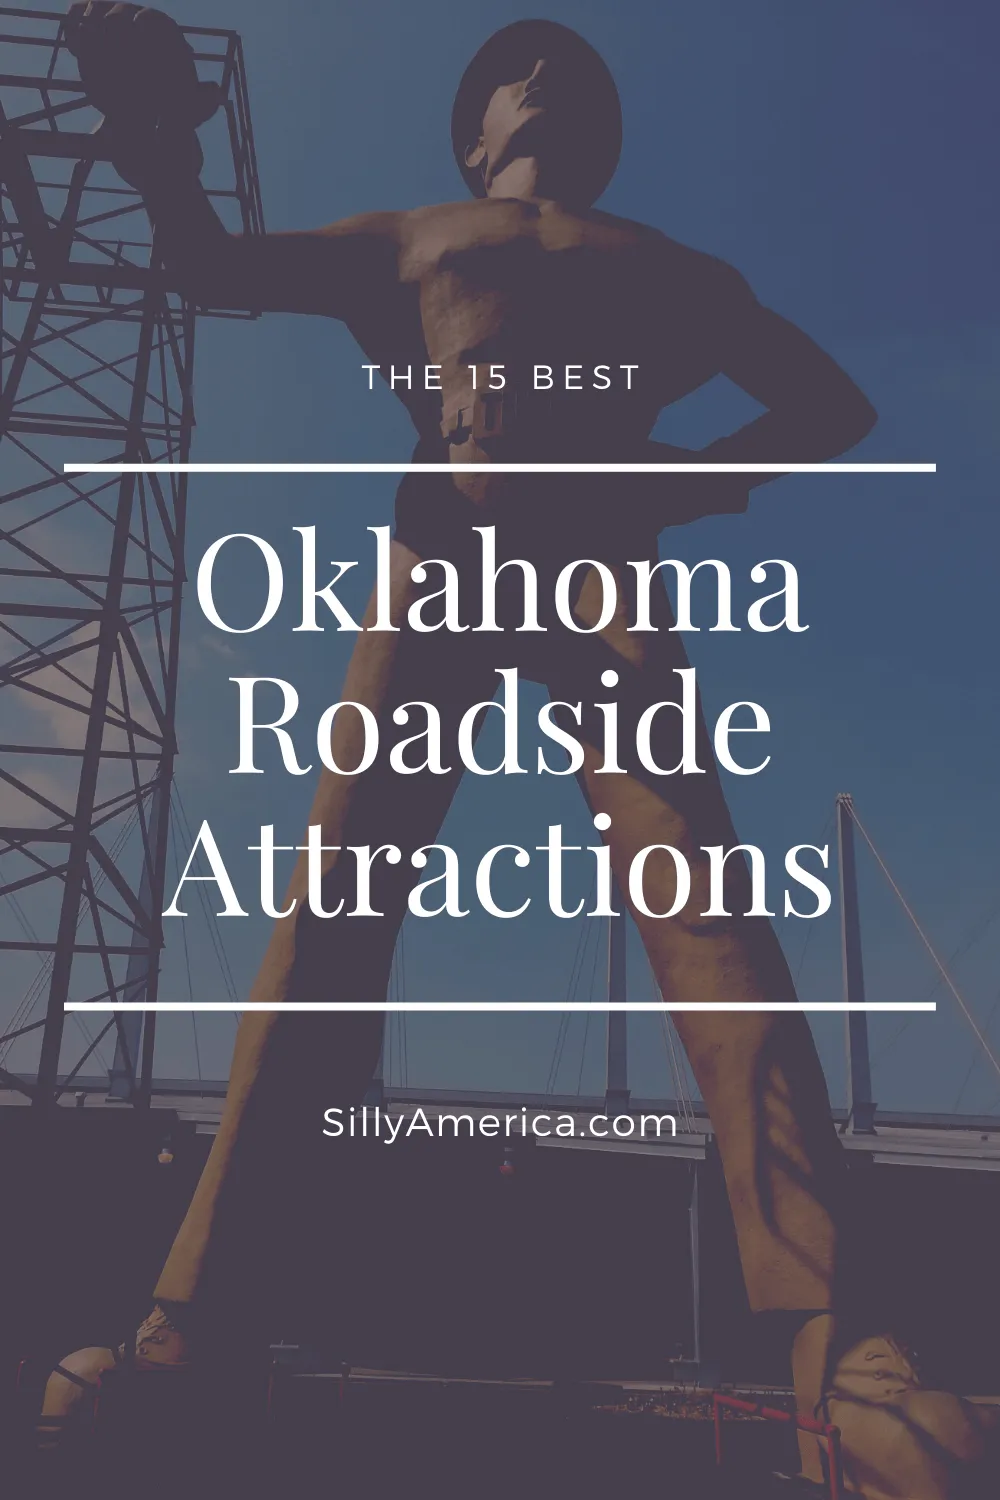 The best Oklahoma roadside attractions to visit on an Oklahoma road trip. Add these roadside oddities to your travel bucket list, itinerary, or route map! Great Route 66 road trip stops in Oklahoma! #OklahomaRoadsideAttractions #OklahomaRoadsideAttraction #RoadsideAttractions #RoadsideAttraction #RoadTrip #OklahomaRoadTrip #OklahomaRoadTripBucketLists #OklahomaBucketList #OklahomaRoadTripThingstoDo #OklahomaRoadTripIdeas #OklahomaRoadTripWithKids #OklahomaRoadTripMap #WeirdRoadsideAttractions